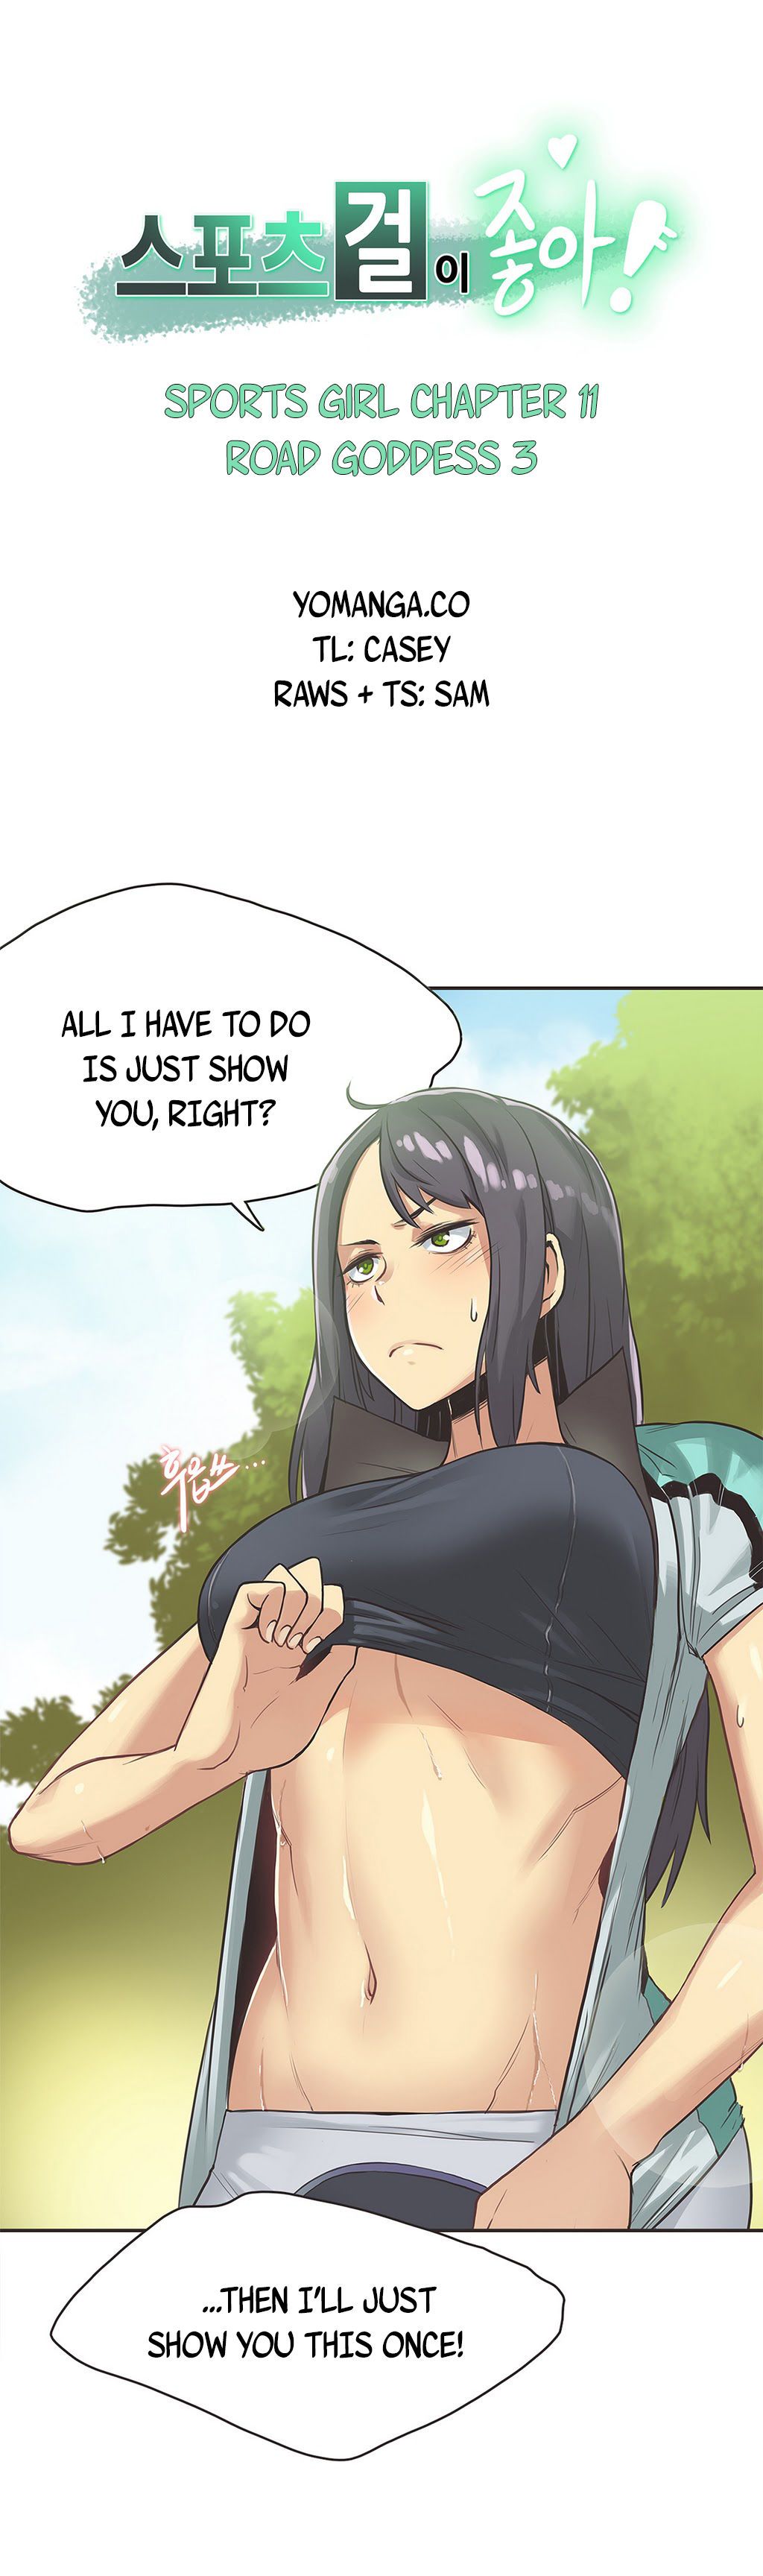 gamang sports Fille ch.1 28 () (yomanga) PARTIE 10